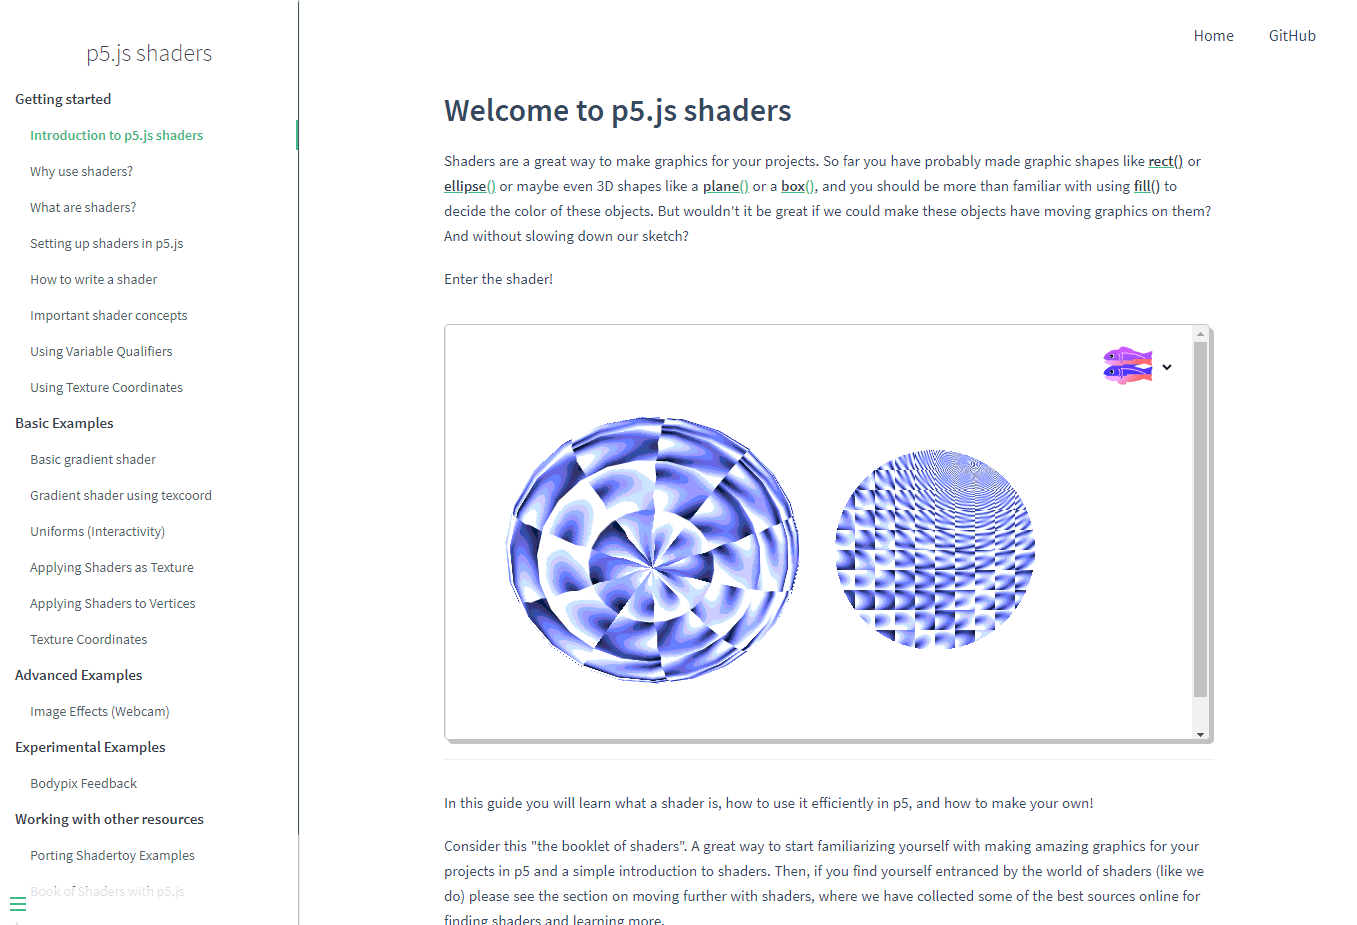 A screenshot of the Introduction page of the p5.js Shaders guide website